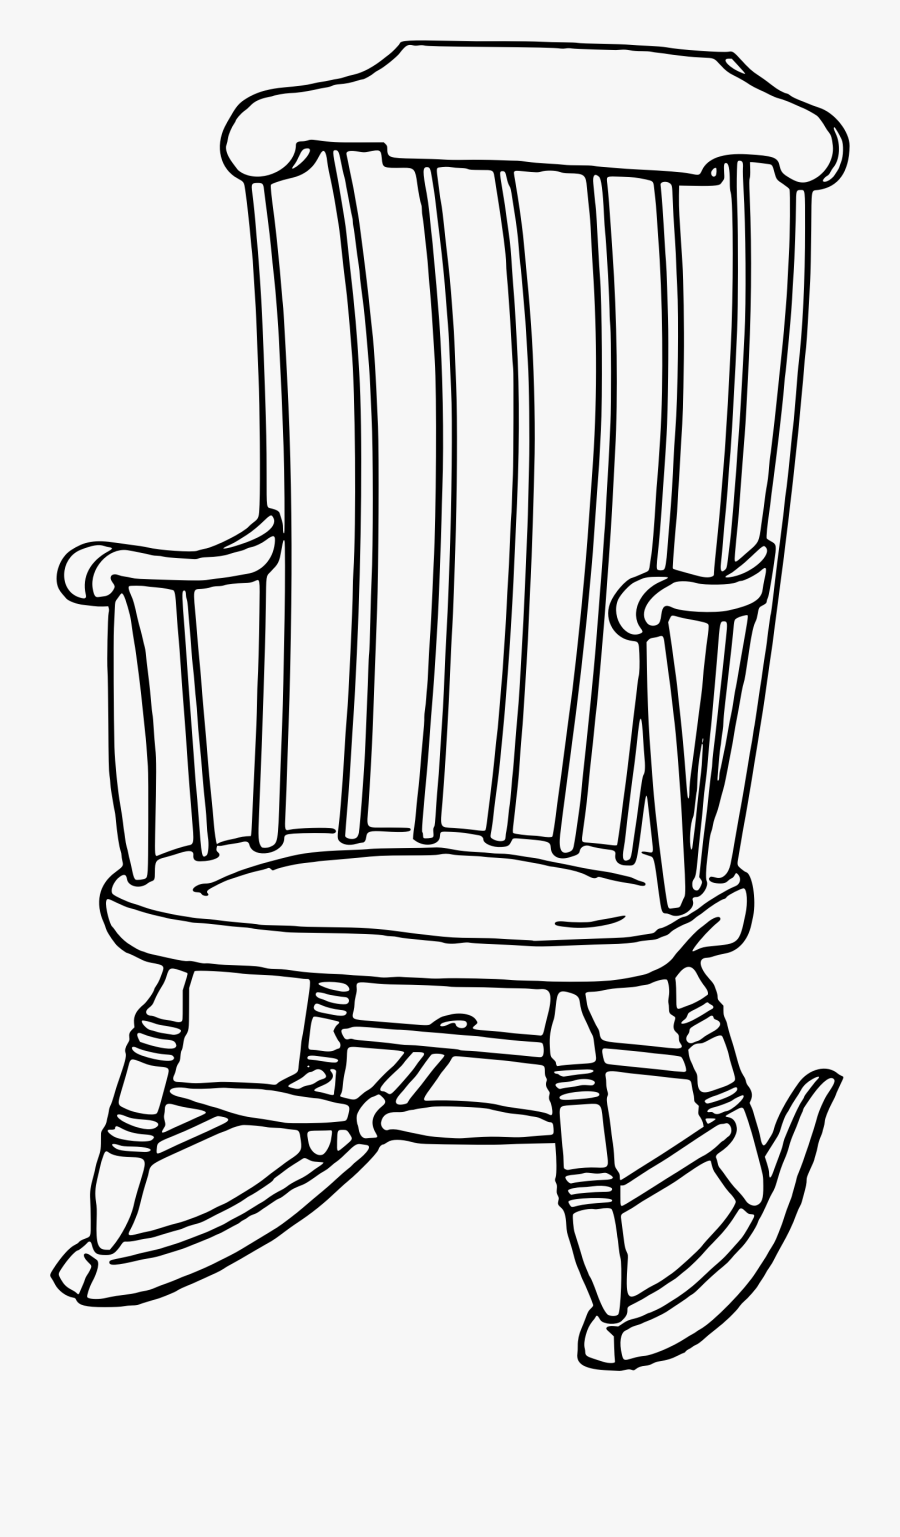 Clipart Chair Drawing - Rocking Chair Clipart, Transparent Clipart